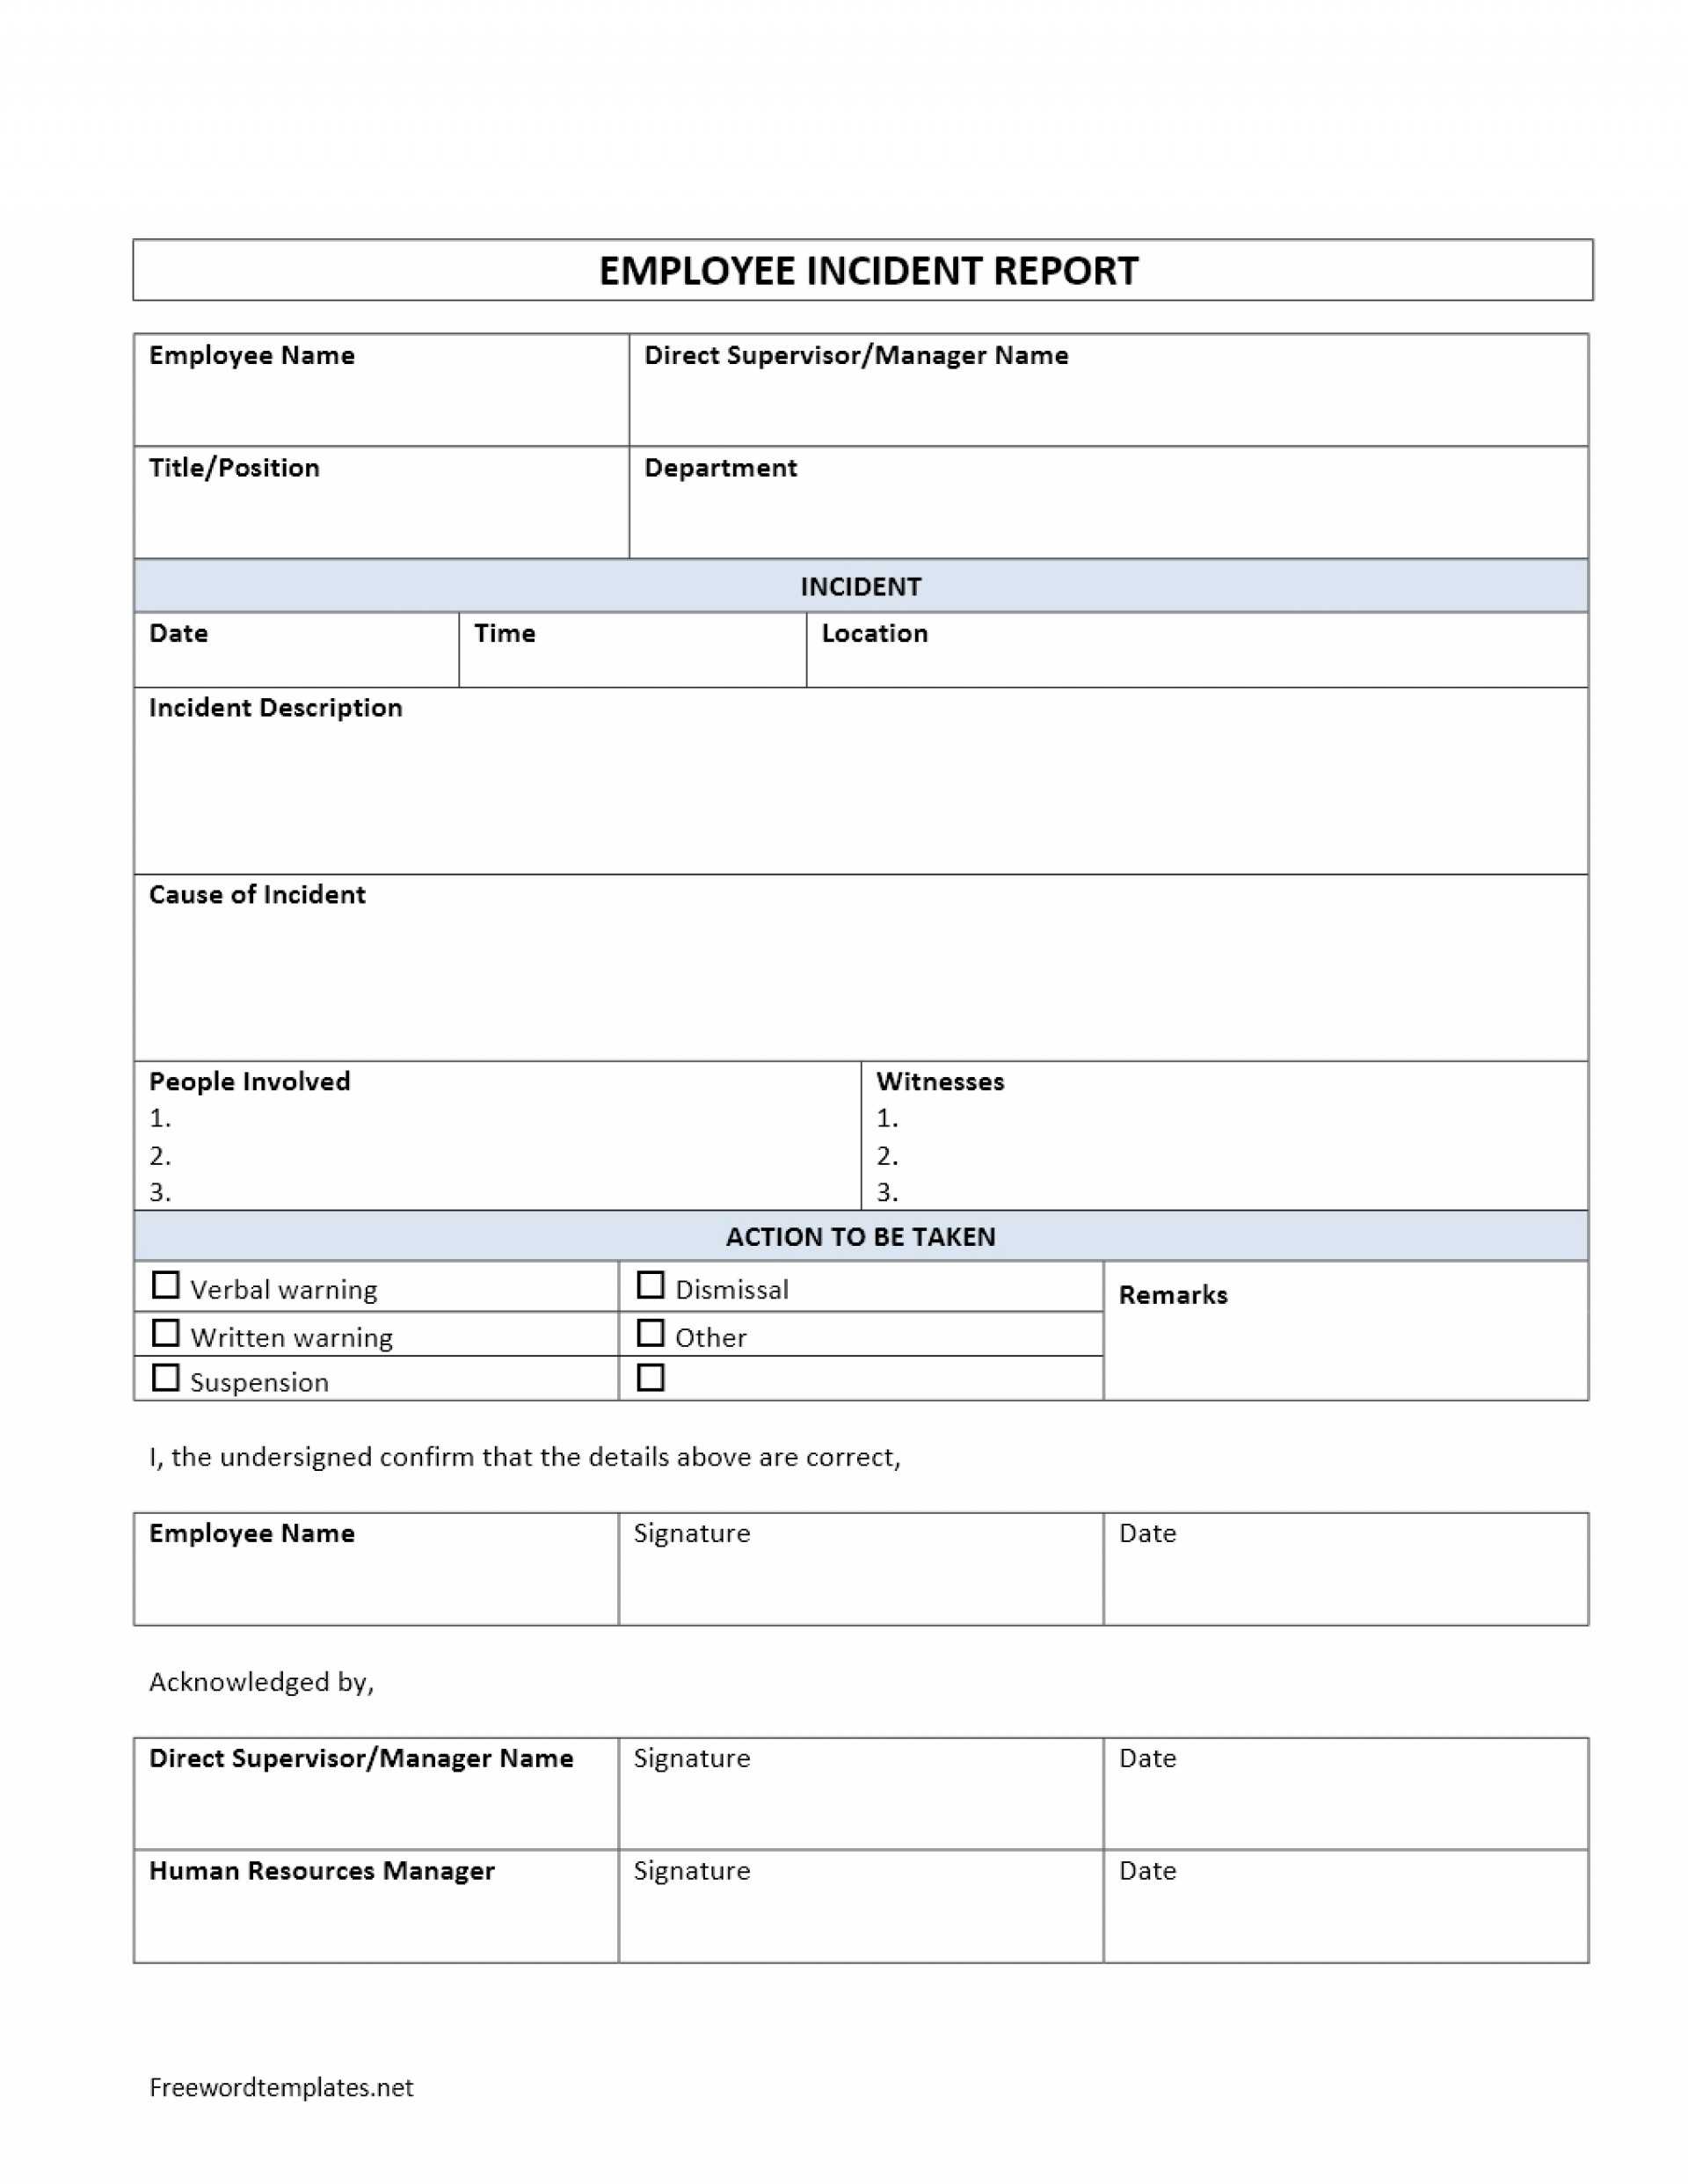 008 20Form Employee Incident Report20Ident Marine Automobile With Ohs Incident Report Template Free